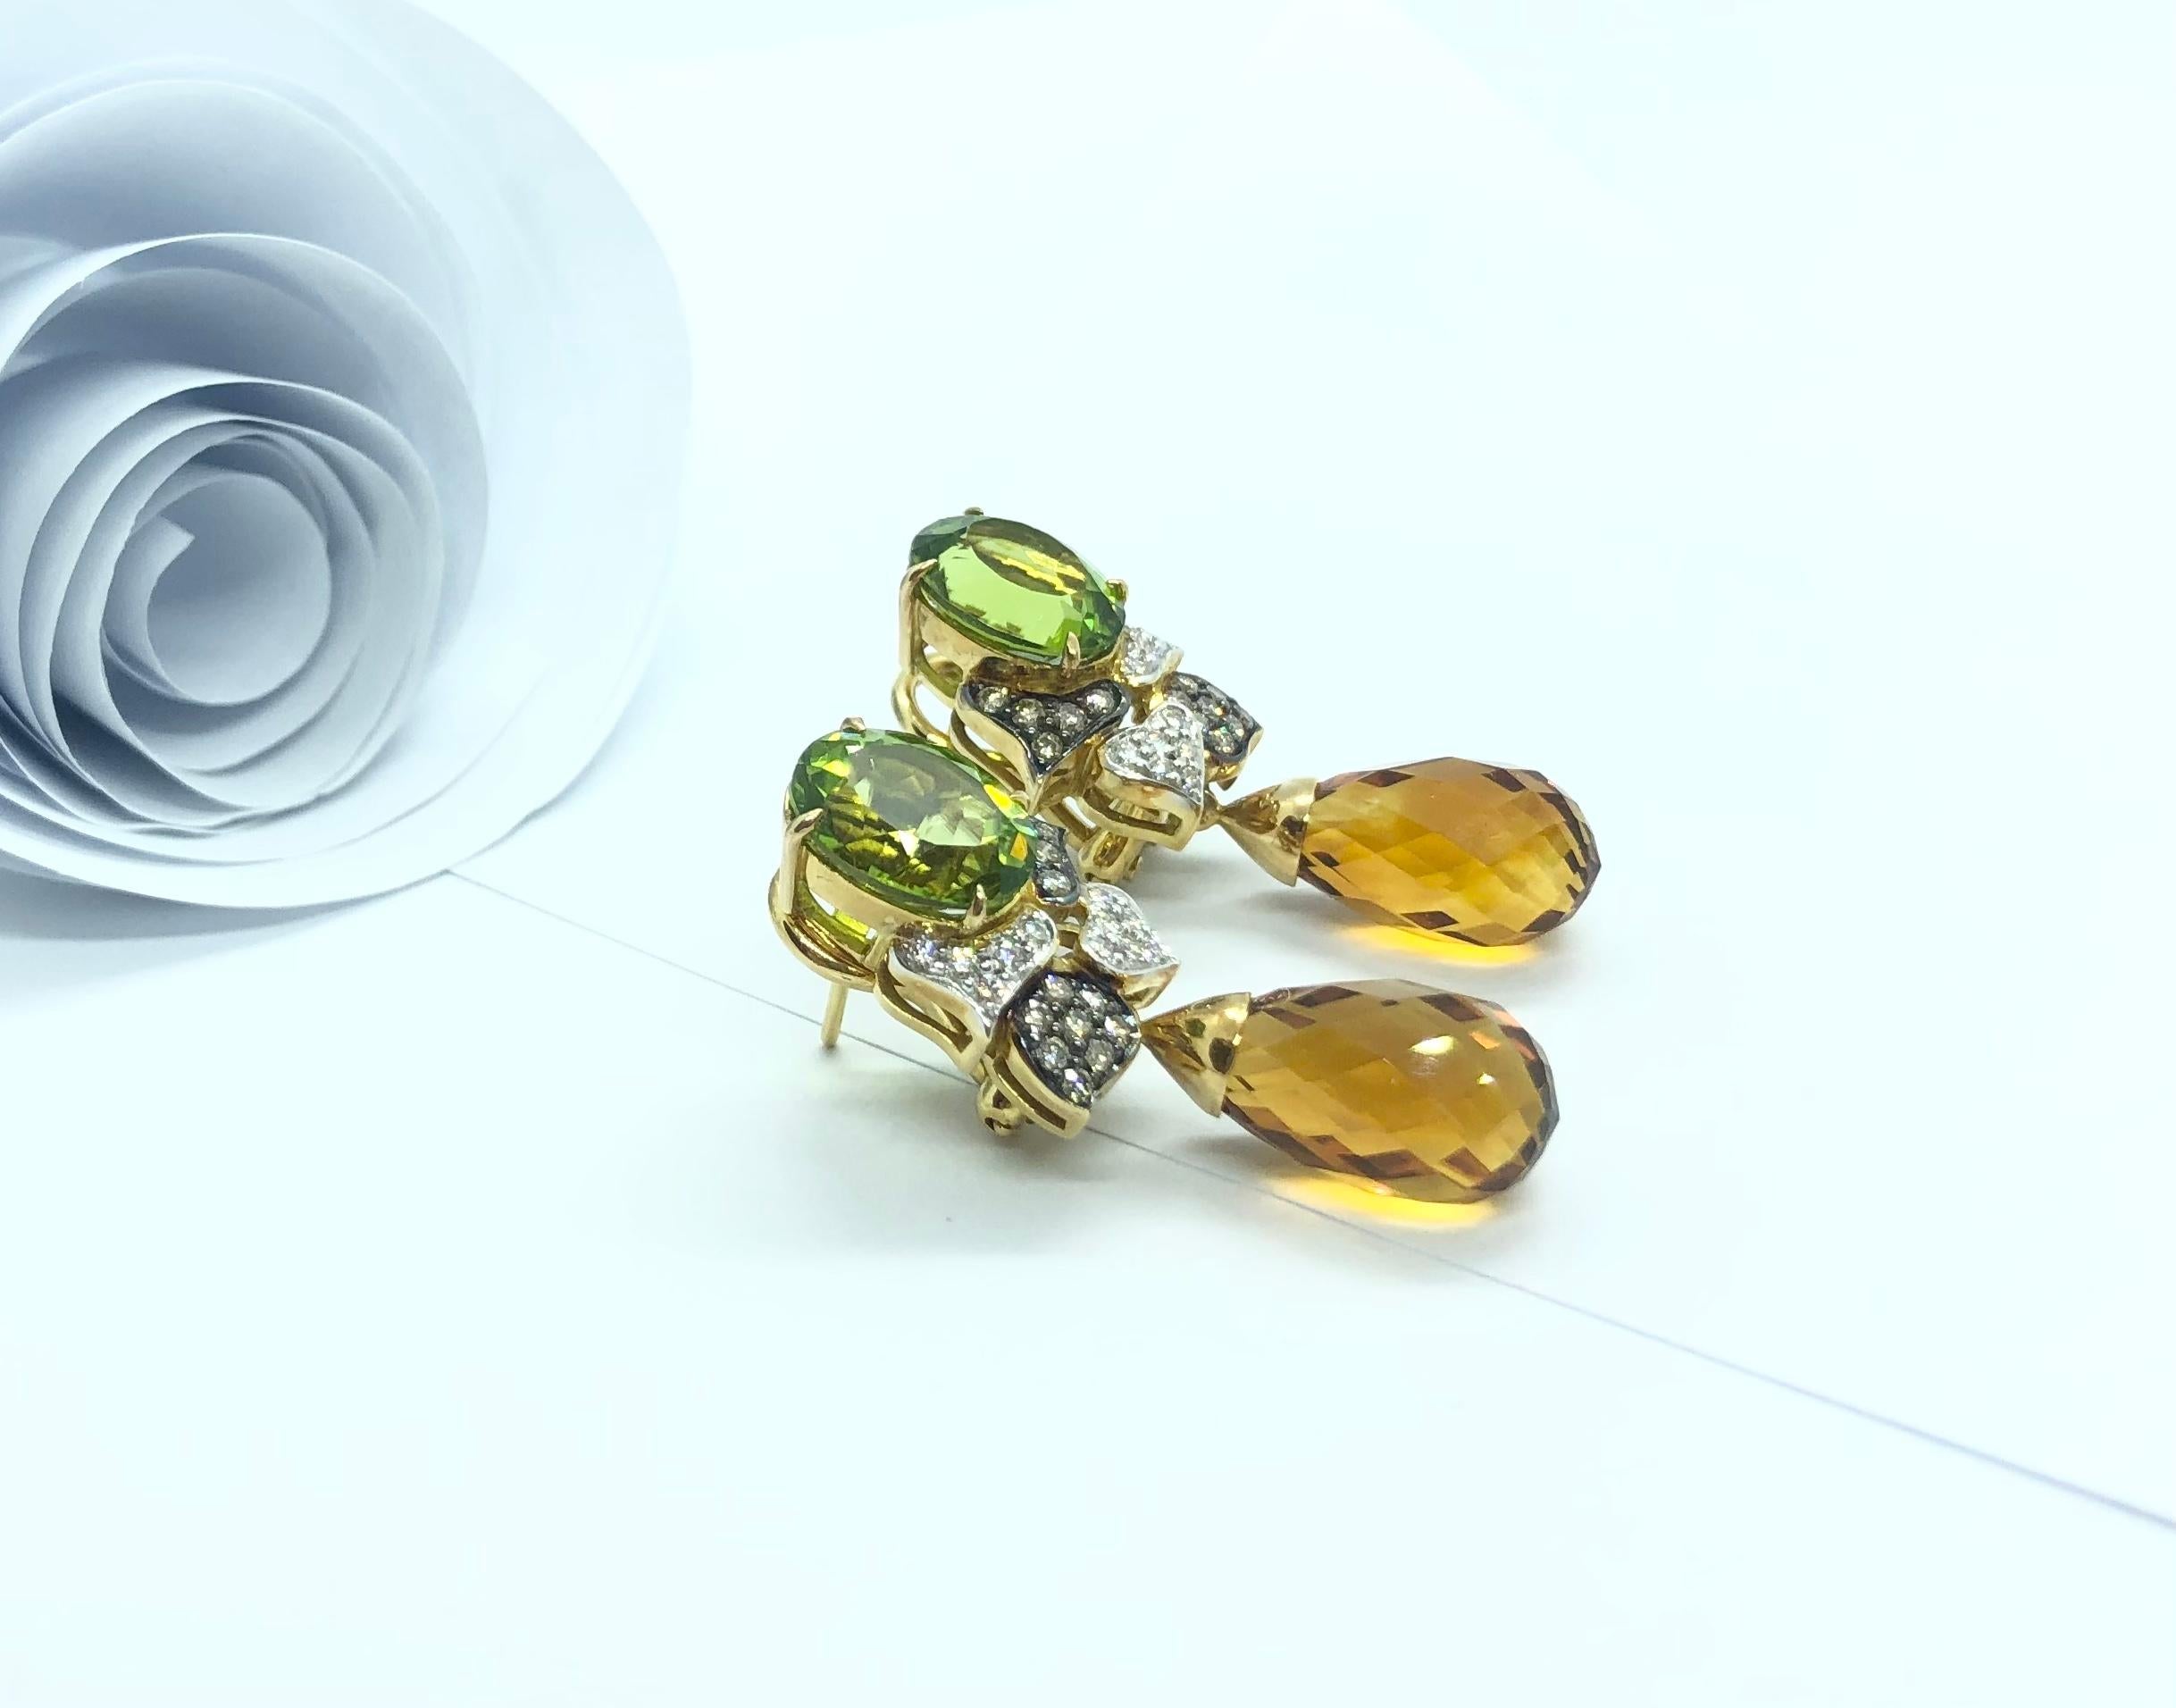 Citrine, Peridot with Brown Diamond and Diamond Earrings Set in 18 Karat Gold For Sale 1